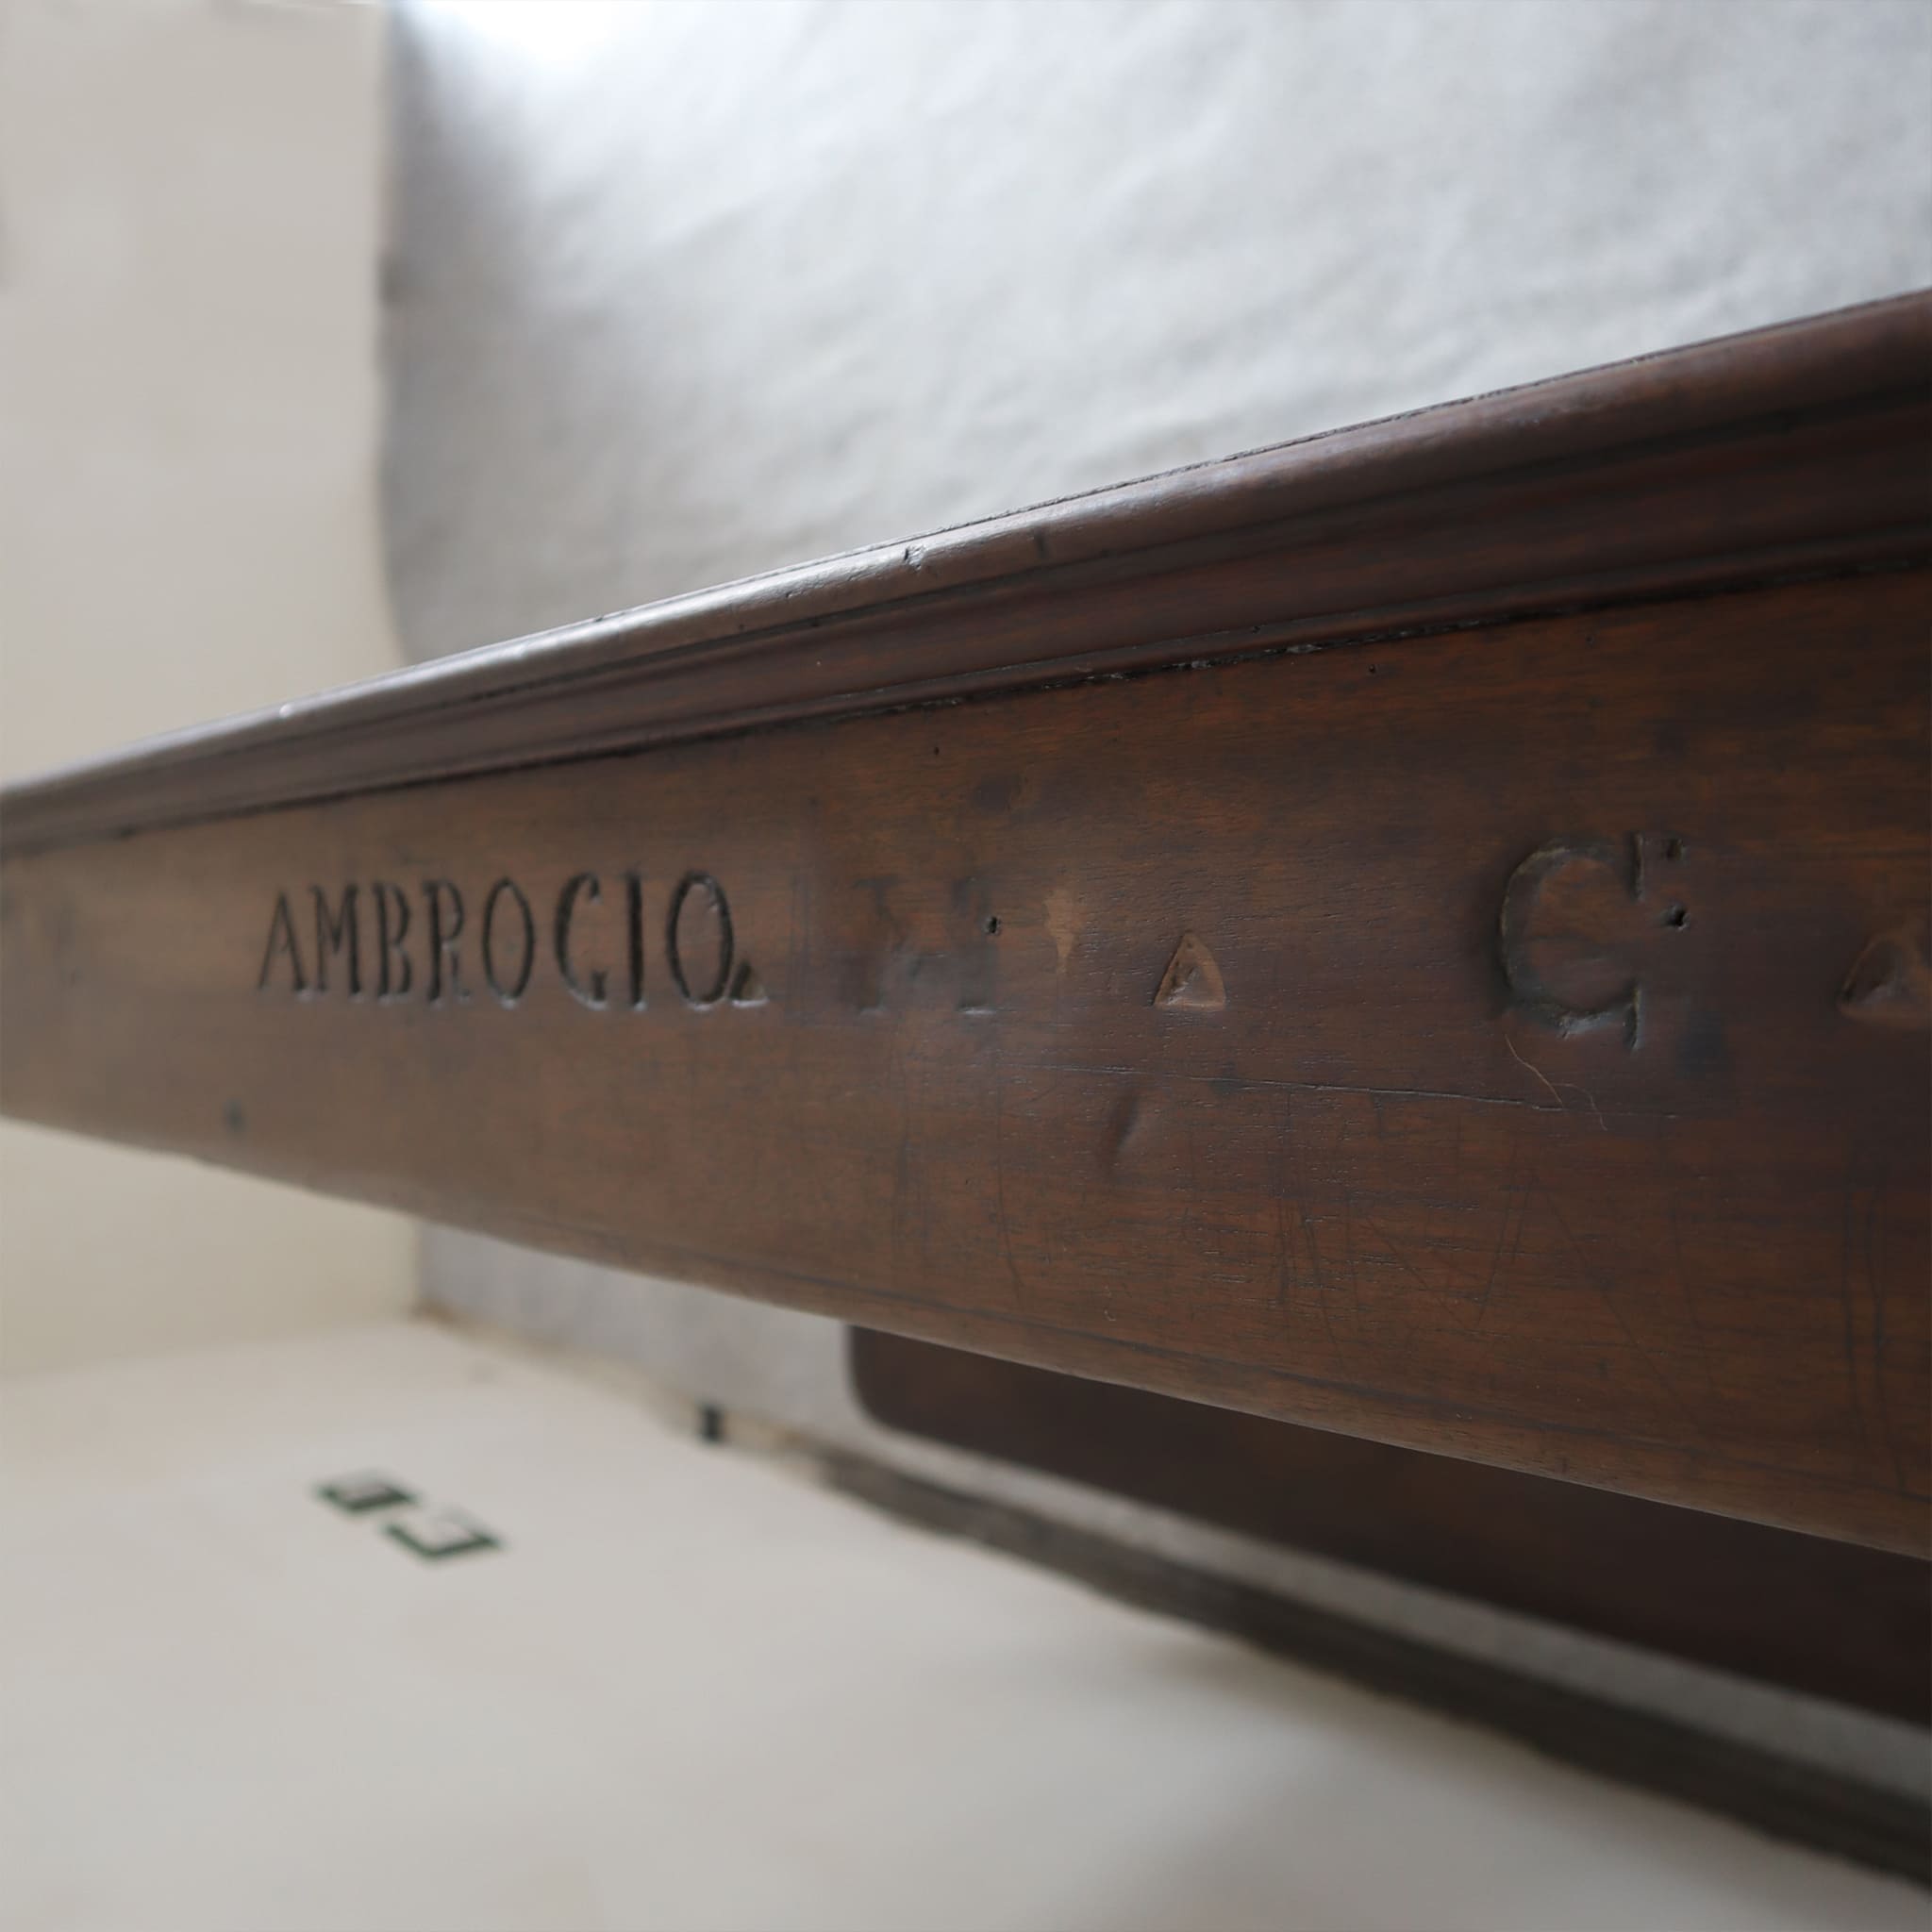 visionidepoca-antique-kneeler-in-solid-walnut-from-18th-century-belonged-to-prince-ambrogio-II-caracciolo-detail-view-engraving-name